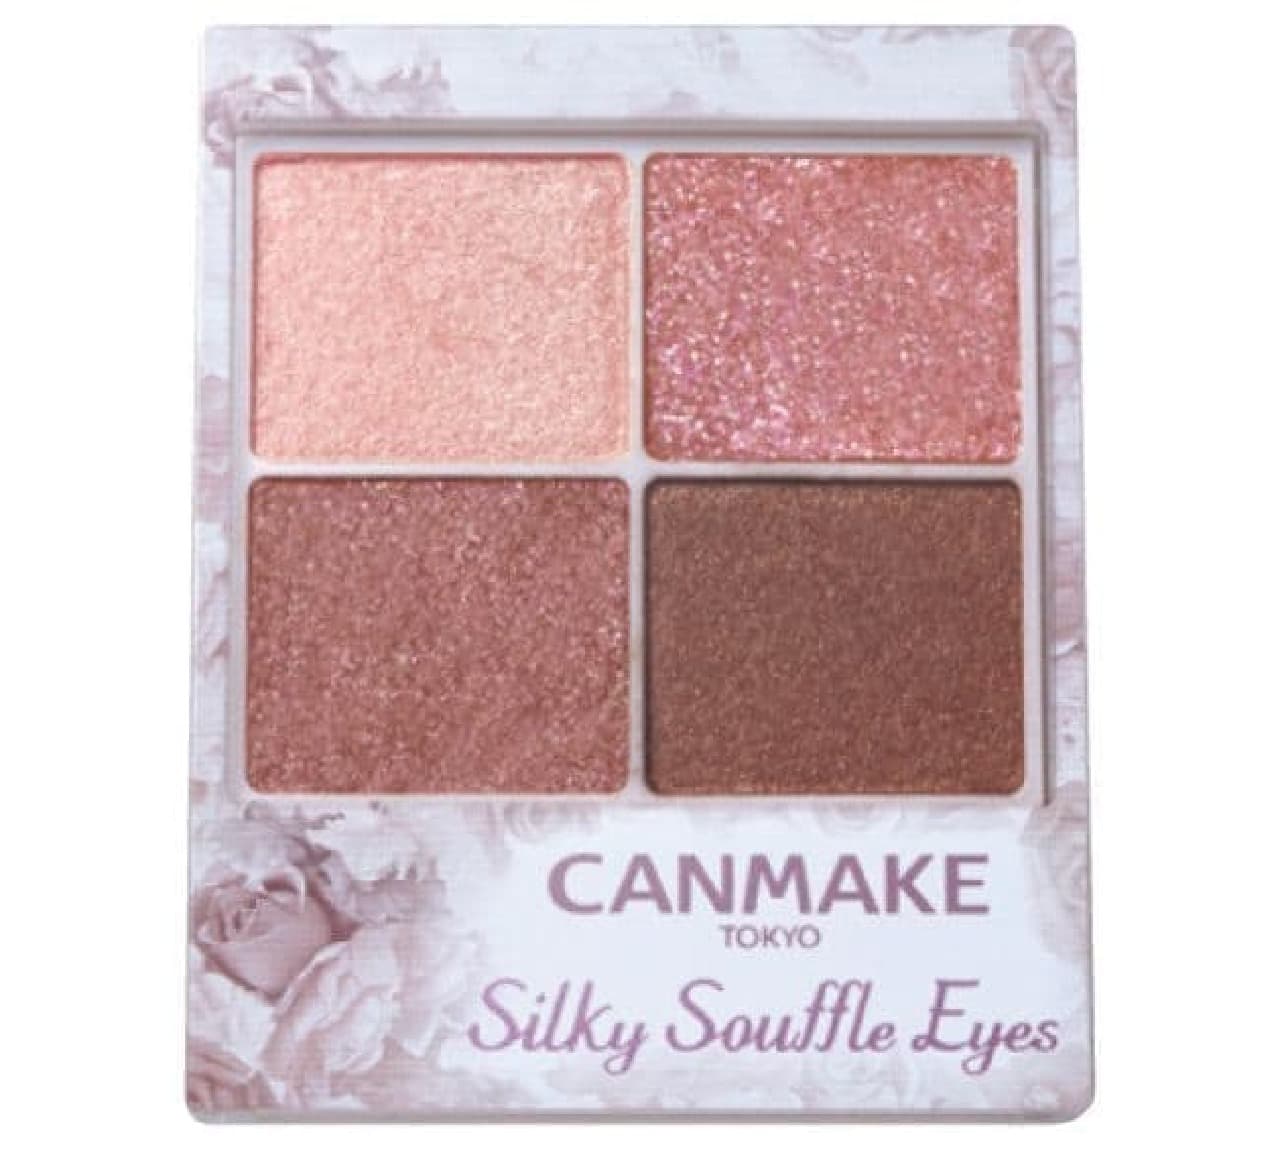 Canmake "Silky Sflare Eyes"